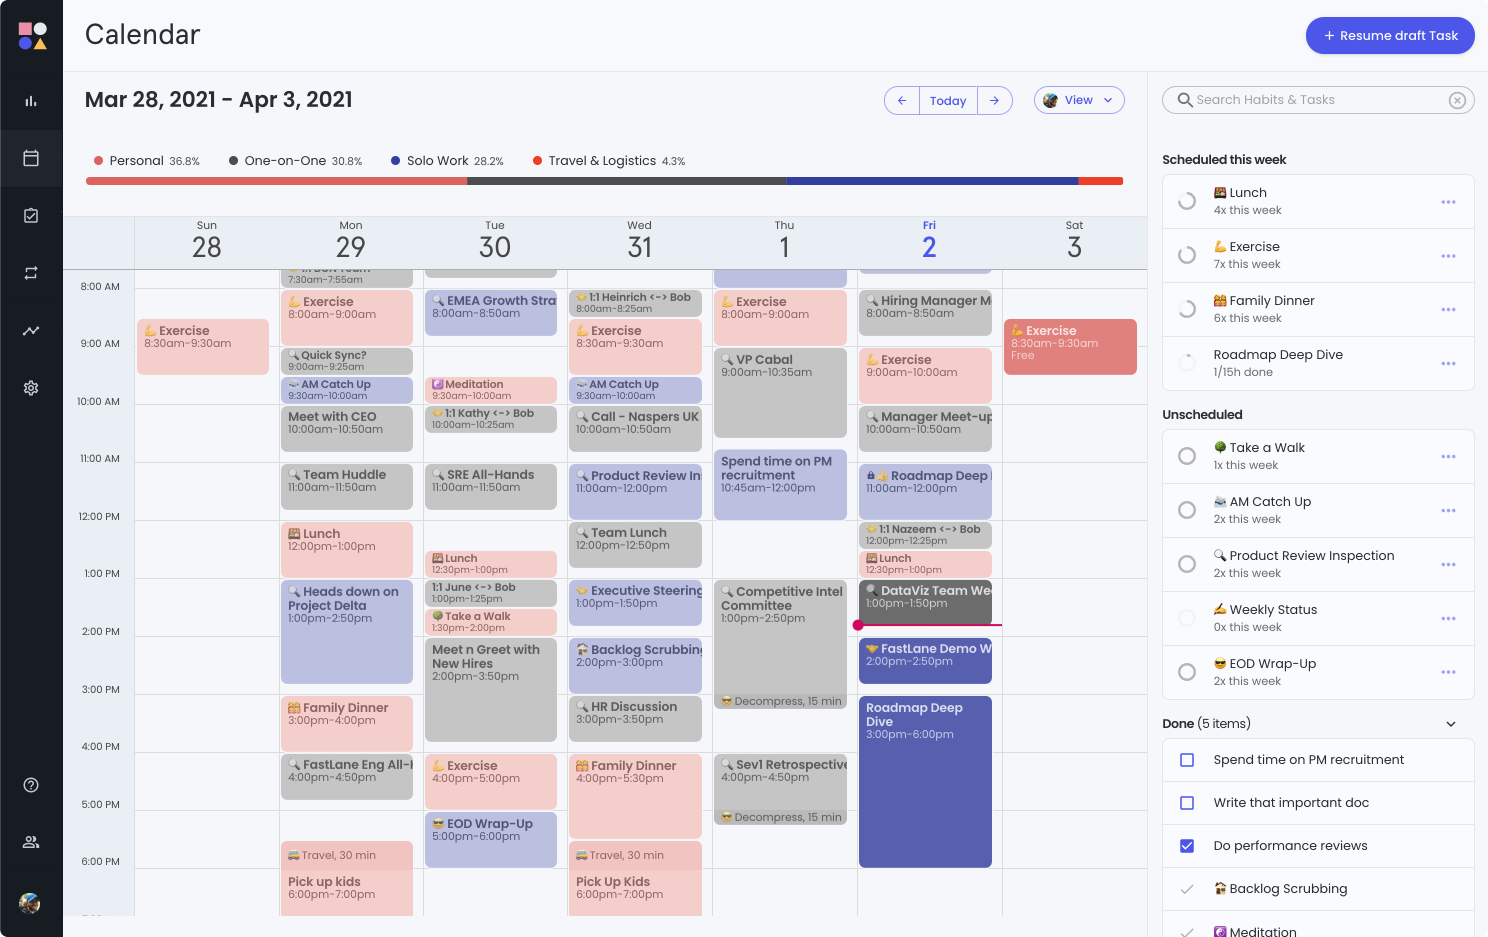 A full calendar, easily rearranged and re-prioritized if needed.